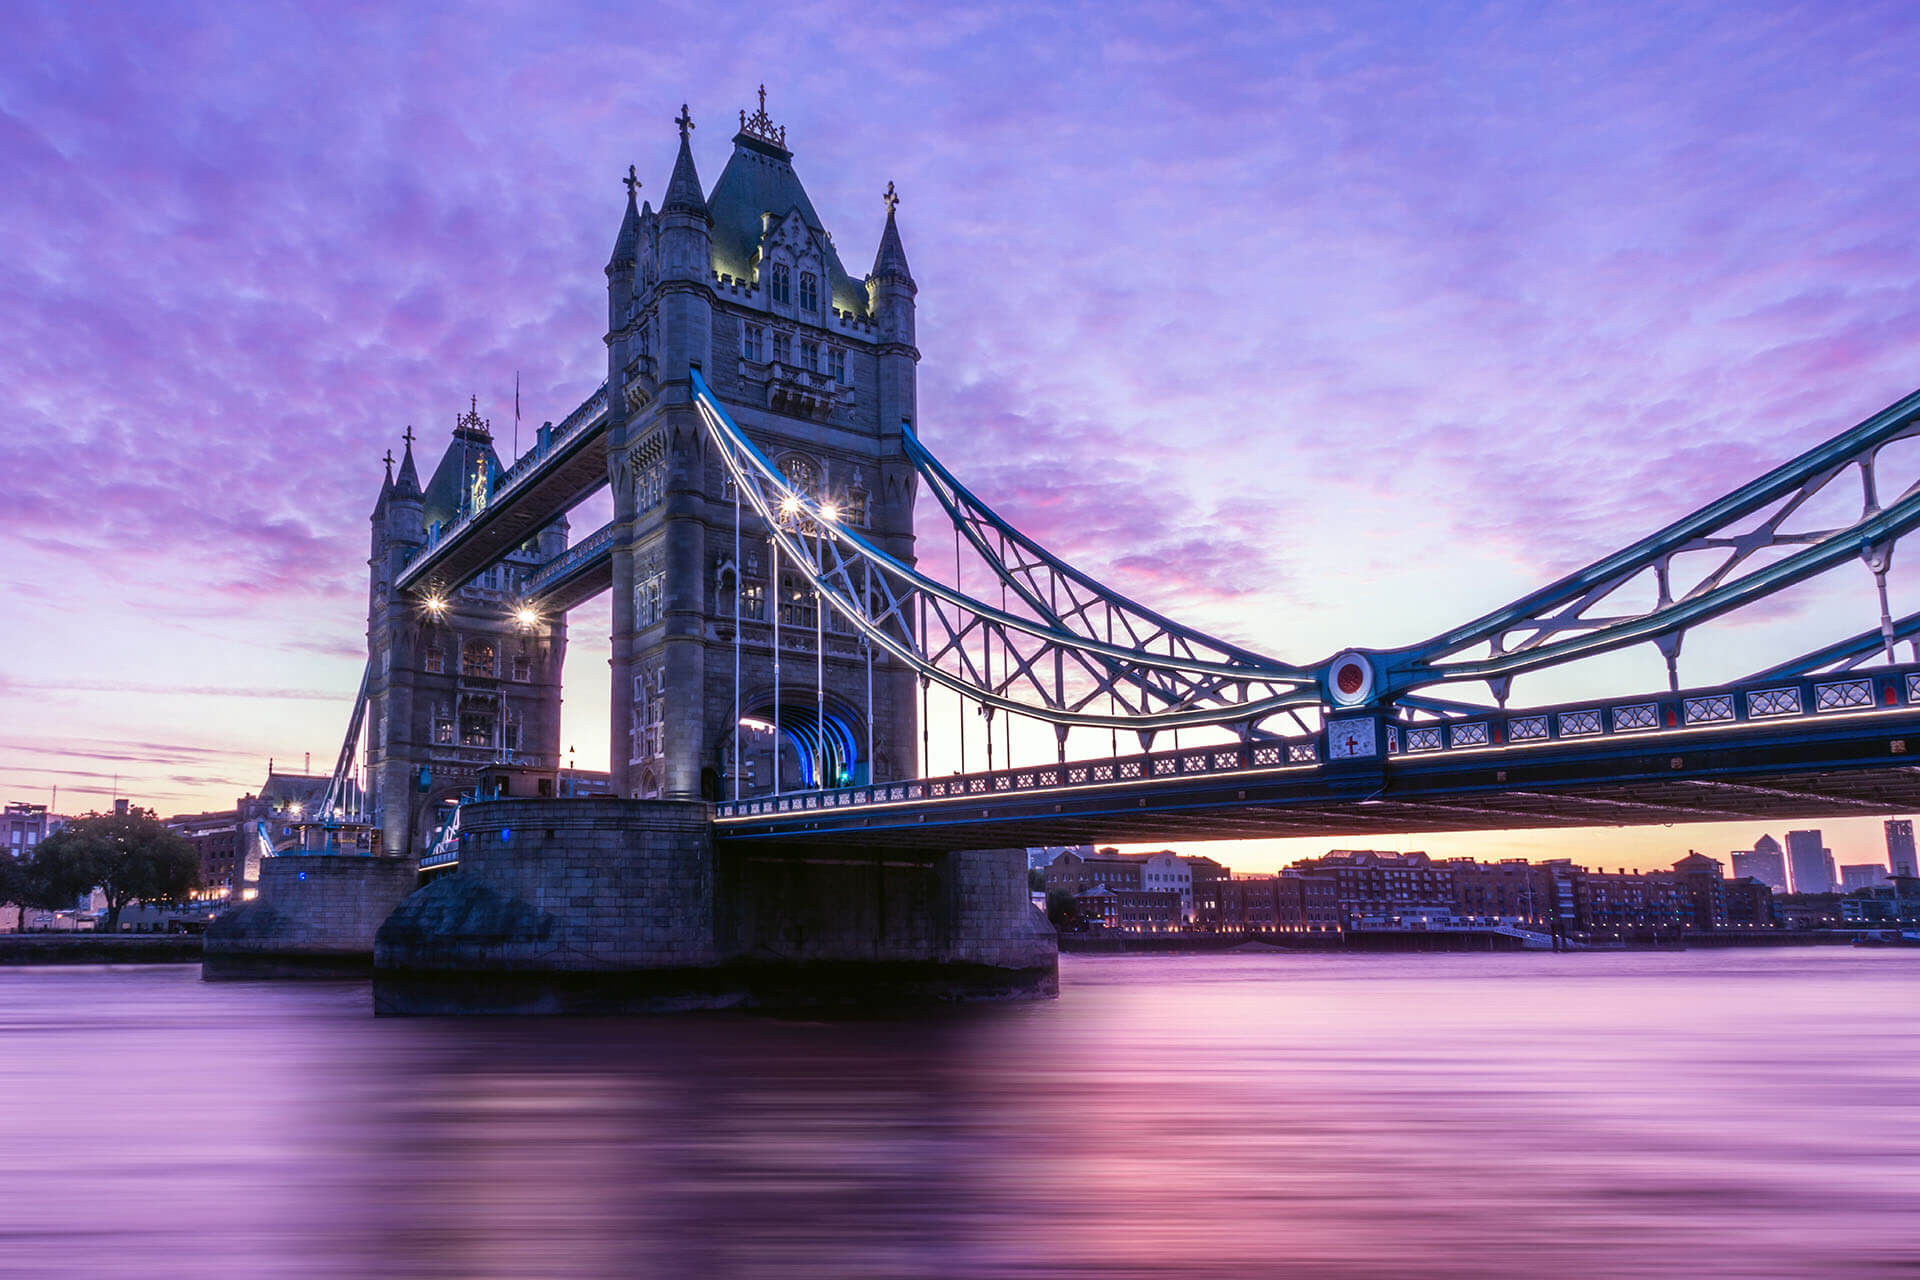 UK: Updated Immigration Rules for Certain Visa Routes